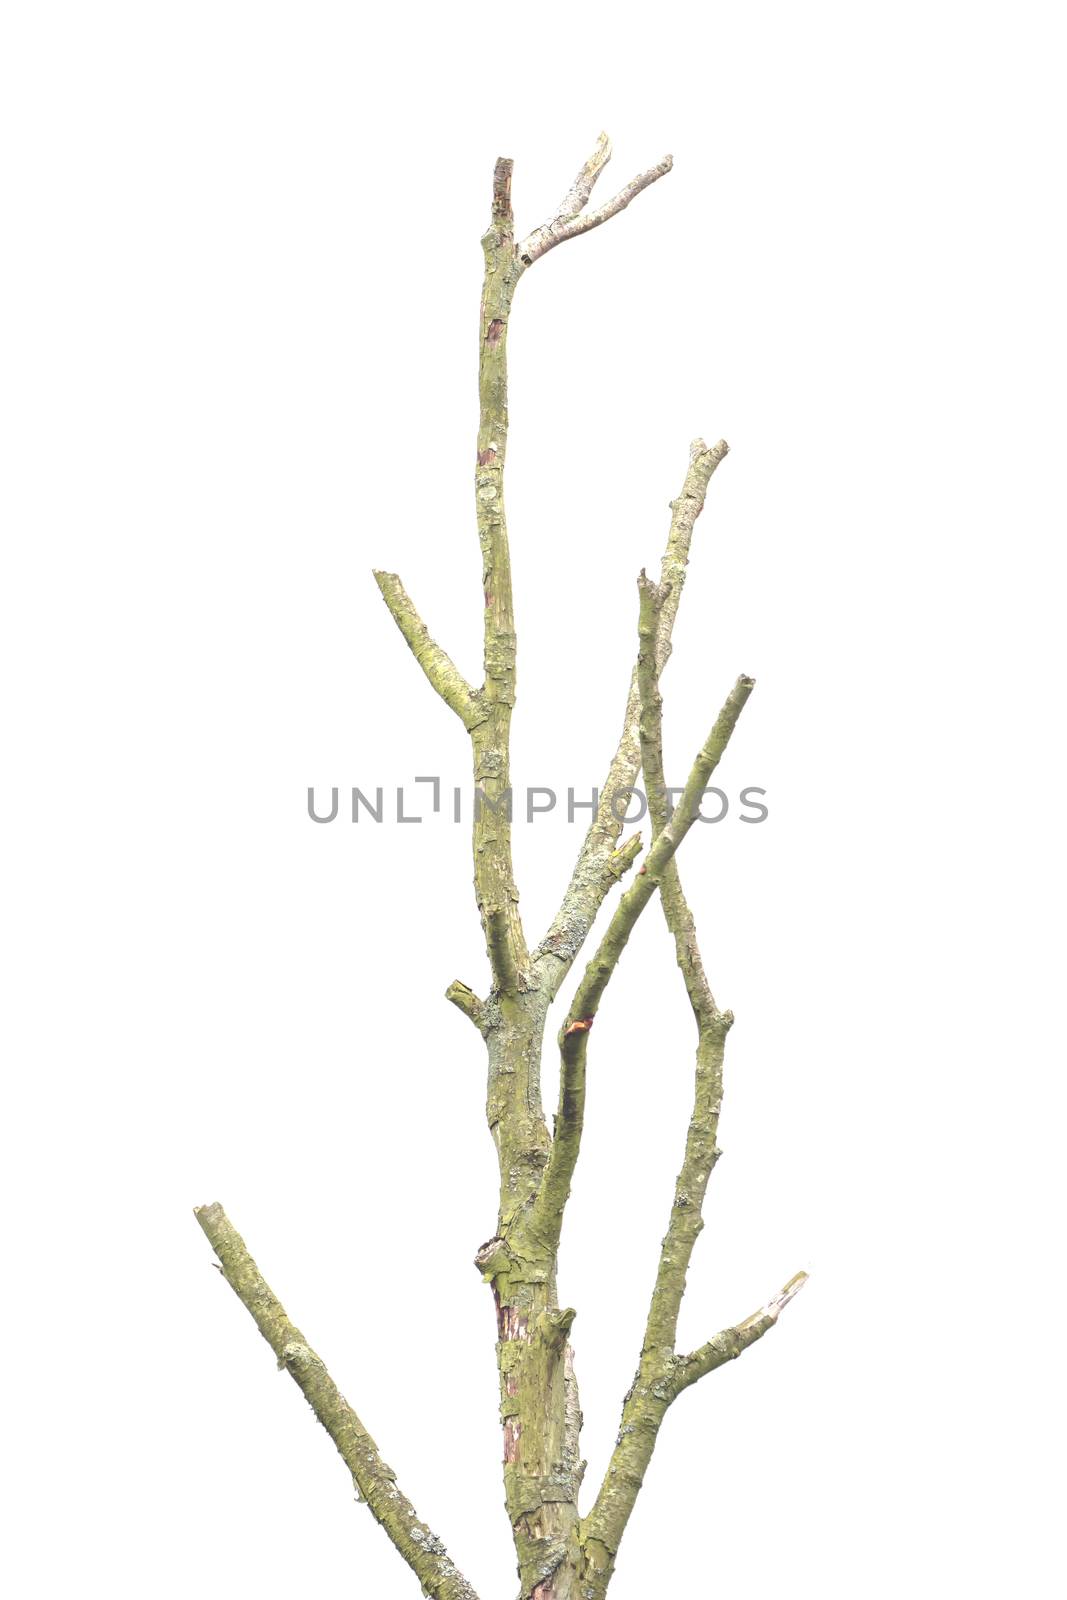 Tree with branches without leaves in front of white background by sandra_fotodesign